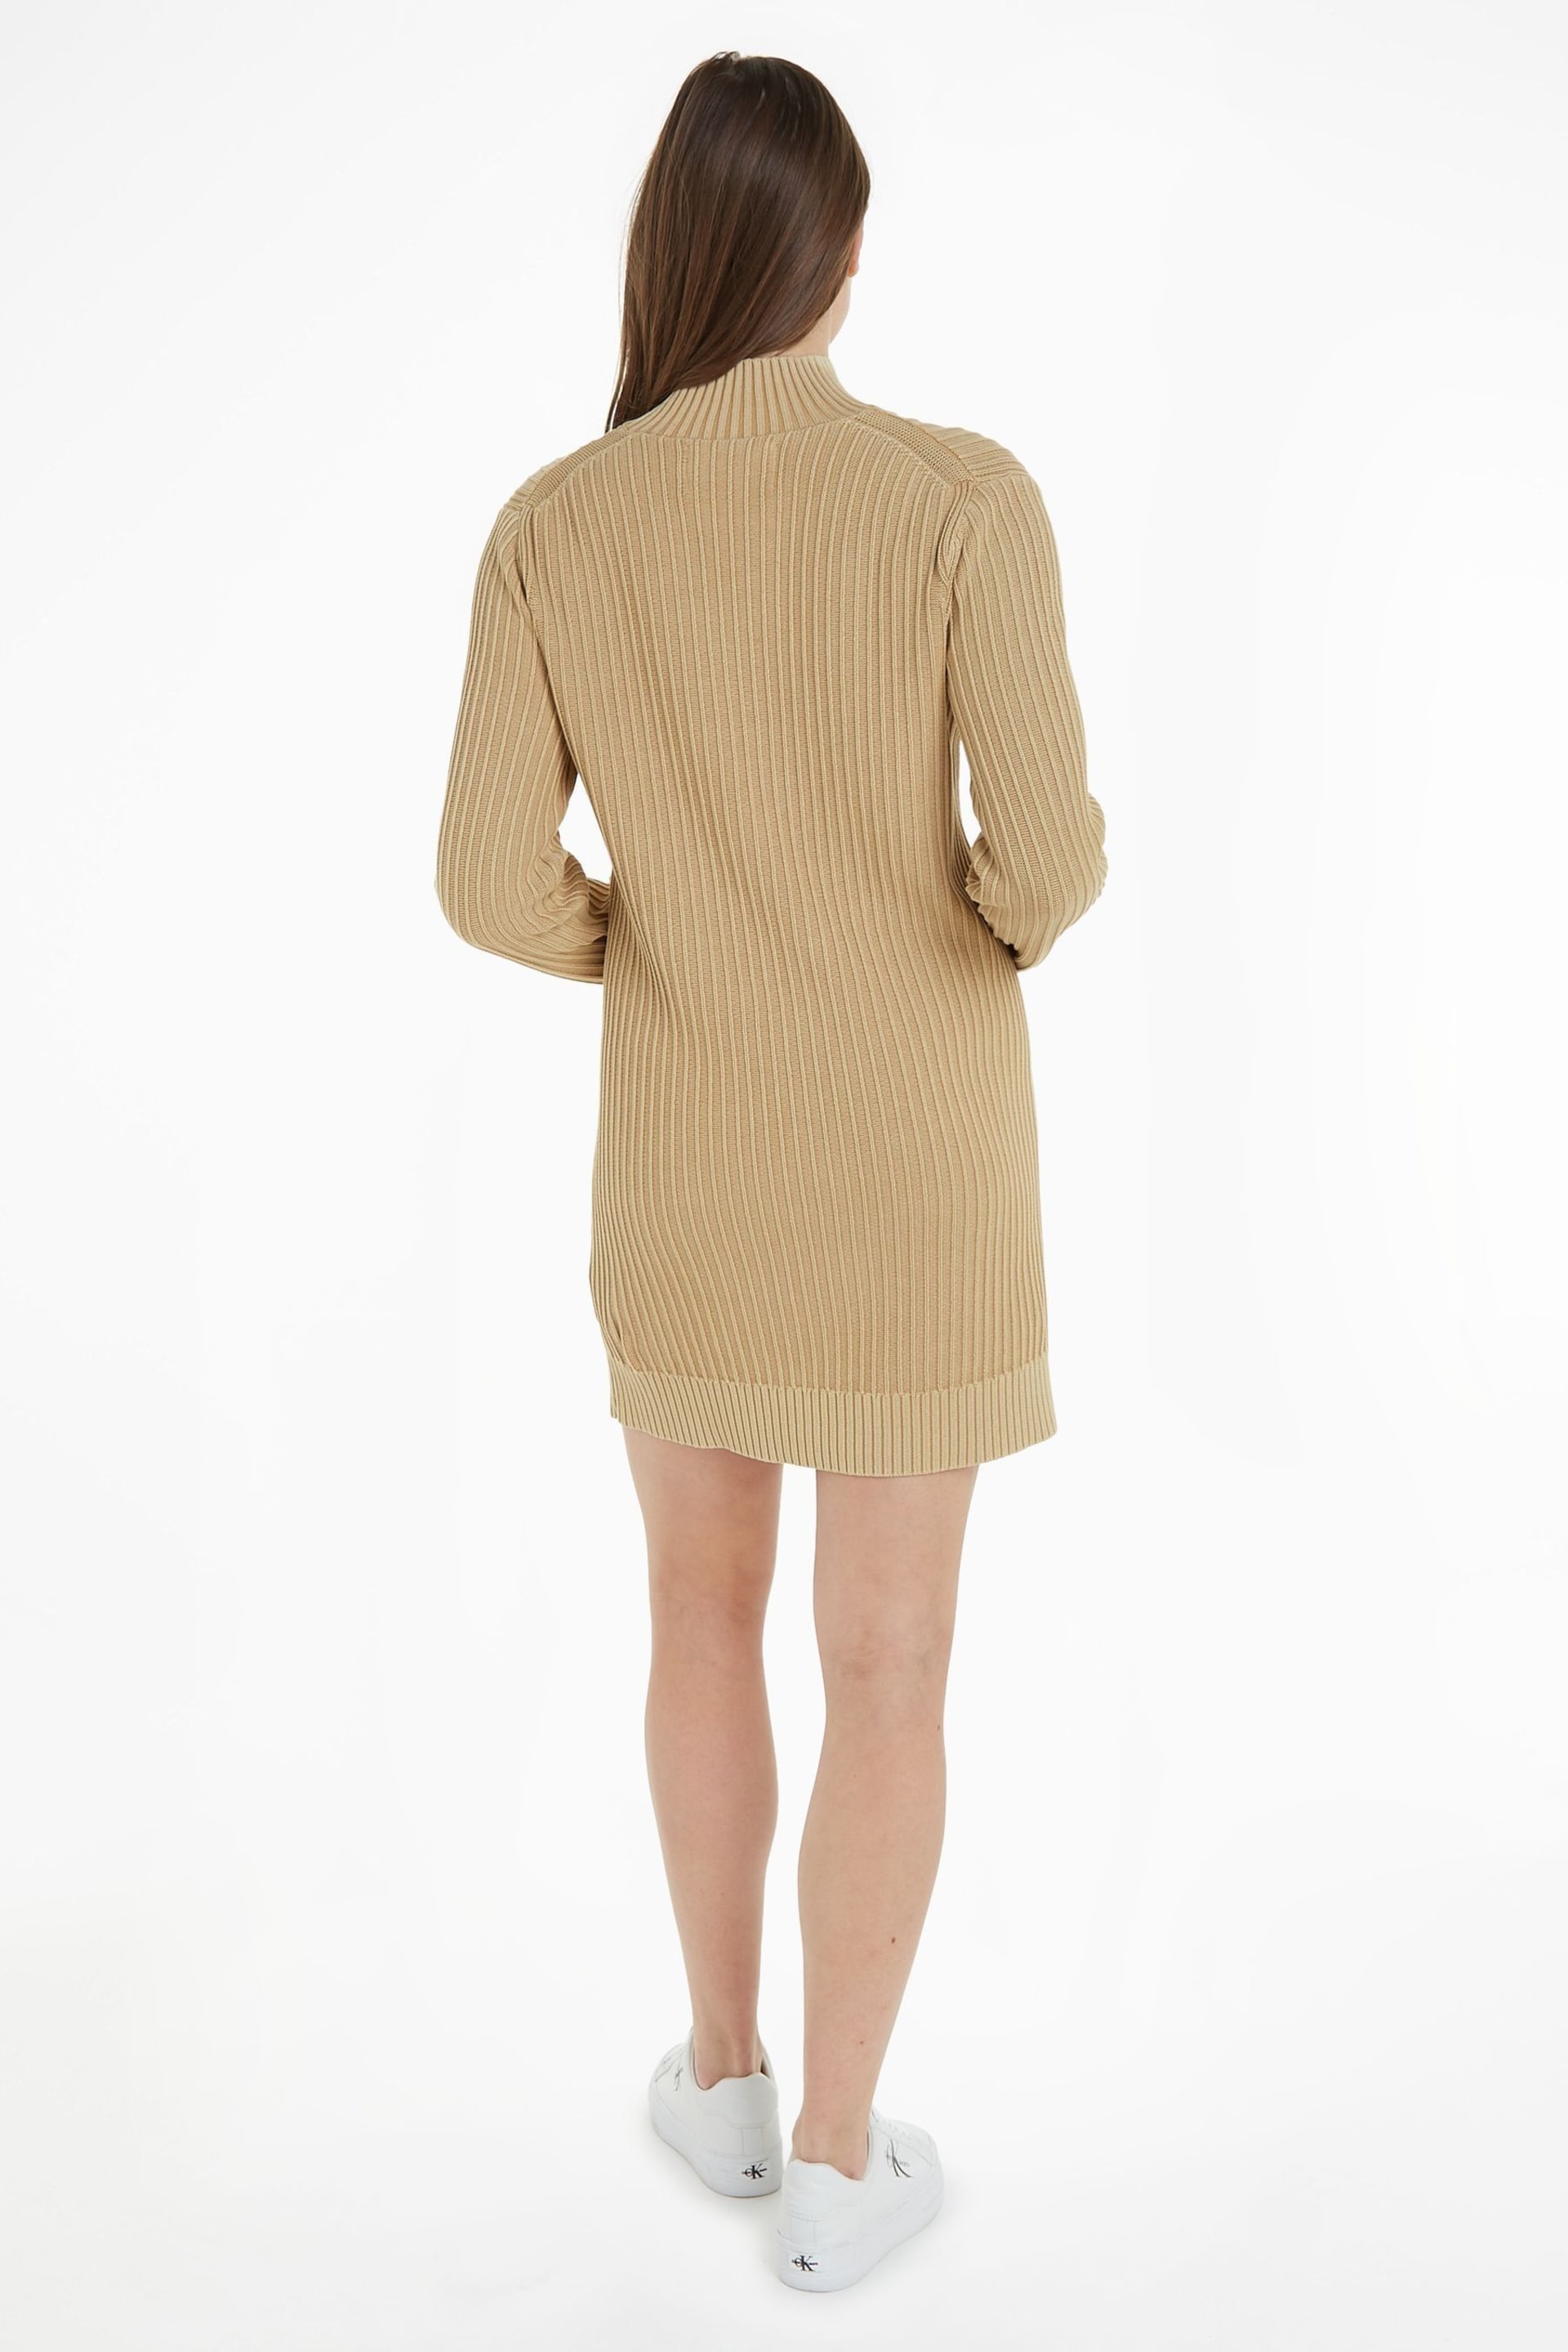 Calvin Klein Jeans Woven Label Sweater Natural Dress - Image 2 of 6